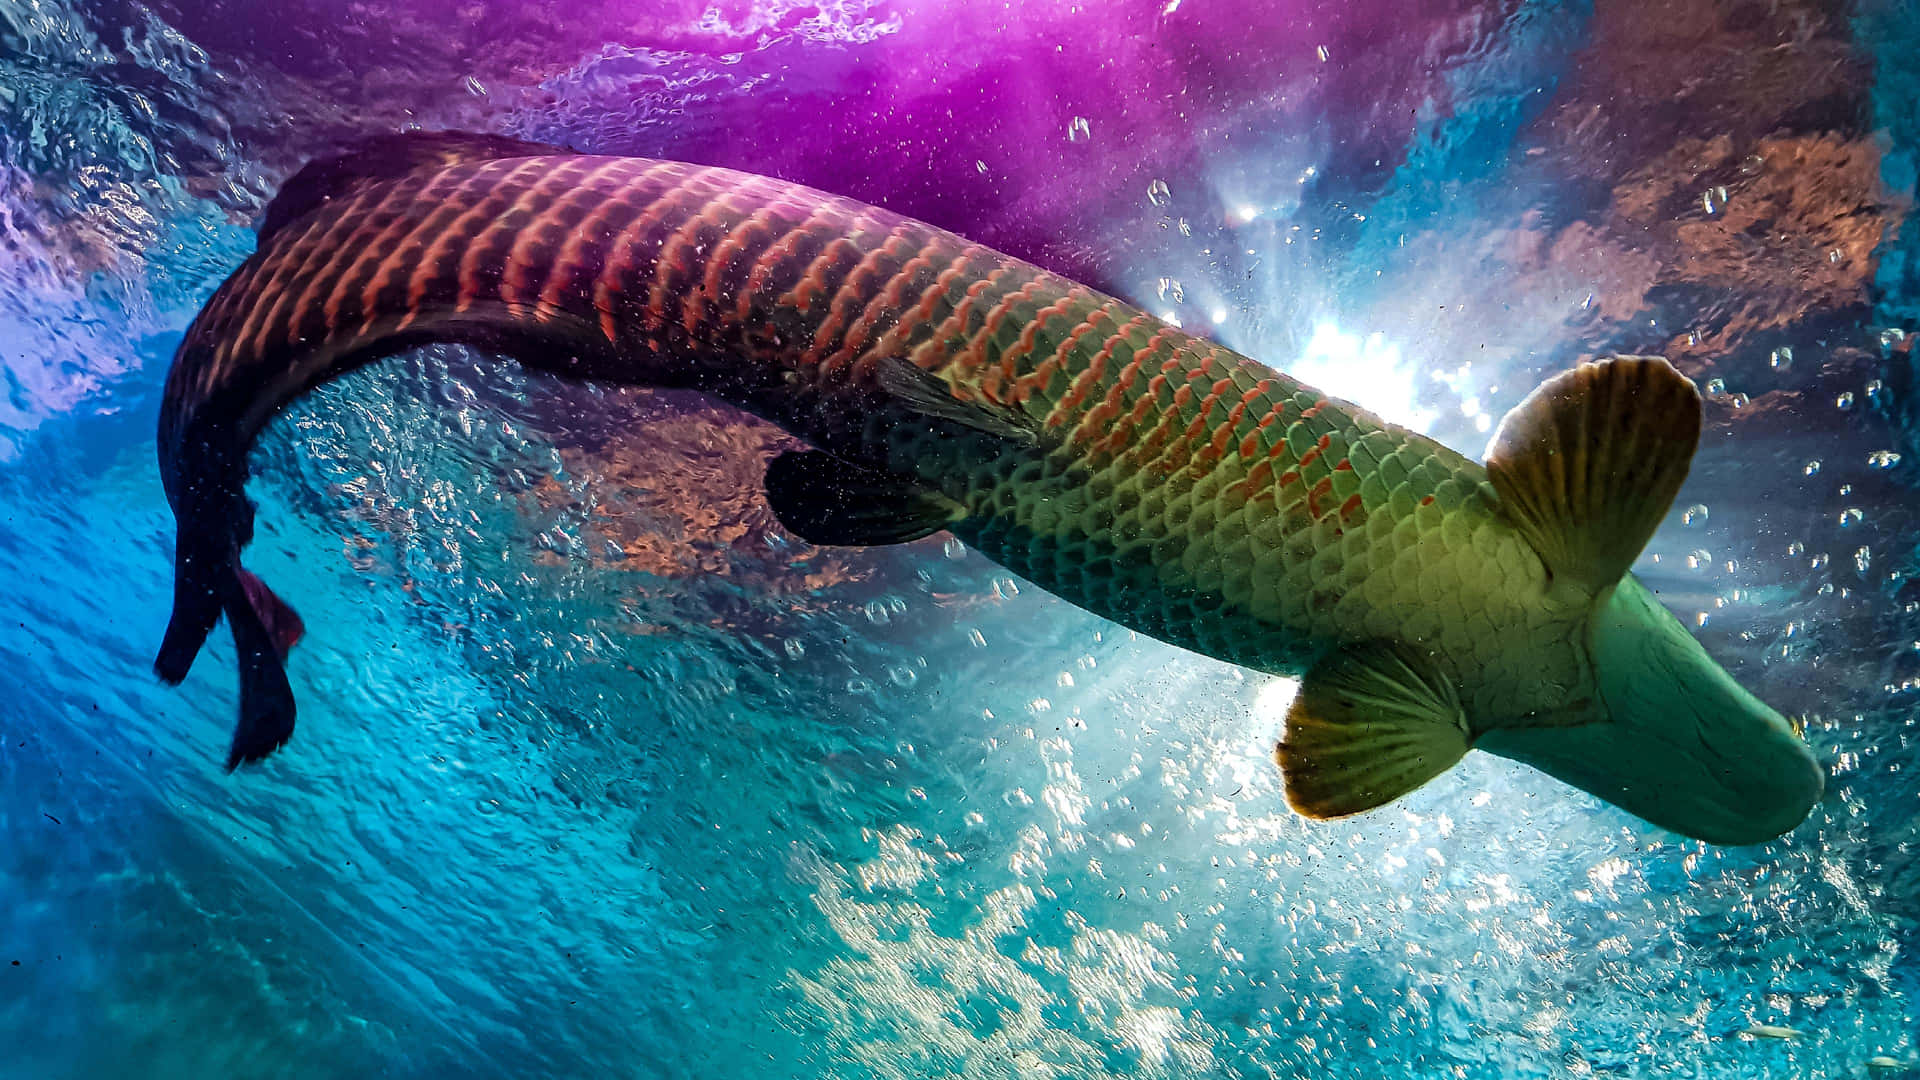 A Large Fish Swimming In The Water Wallpaper